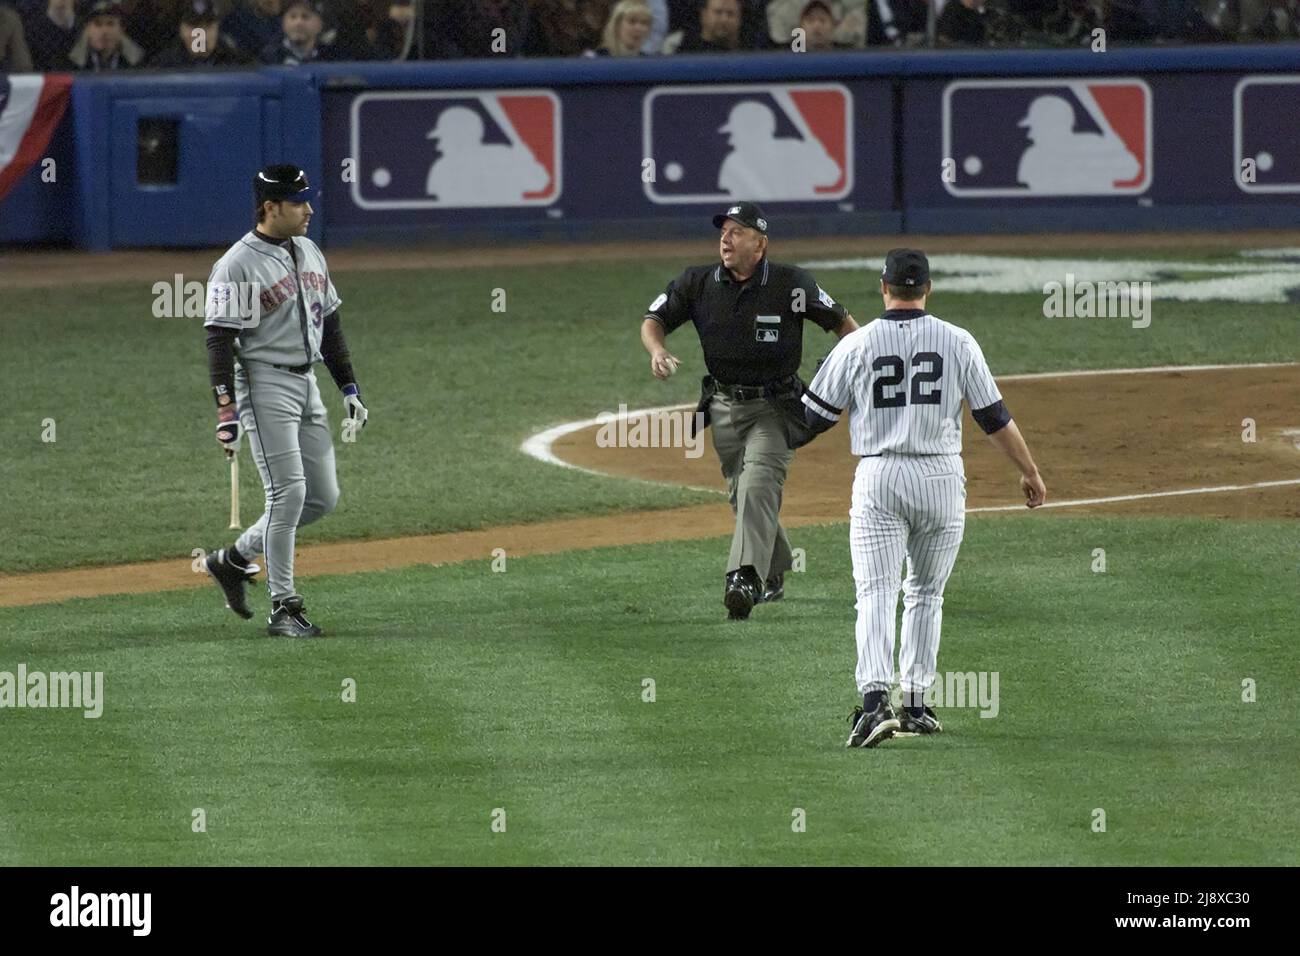 New York Mets batter Mike Piazza, left, confronts New York Yankees pitcher Roger Clemens after he threw a bat  during World Series Game 1 at Yankees Stadium in New York on October 22, 2000. Home plate umpire Charlie Reliford is shown in the middle. Photo by Francis Specker Stock Photo